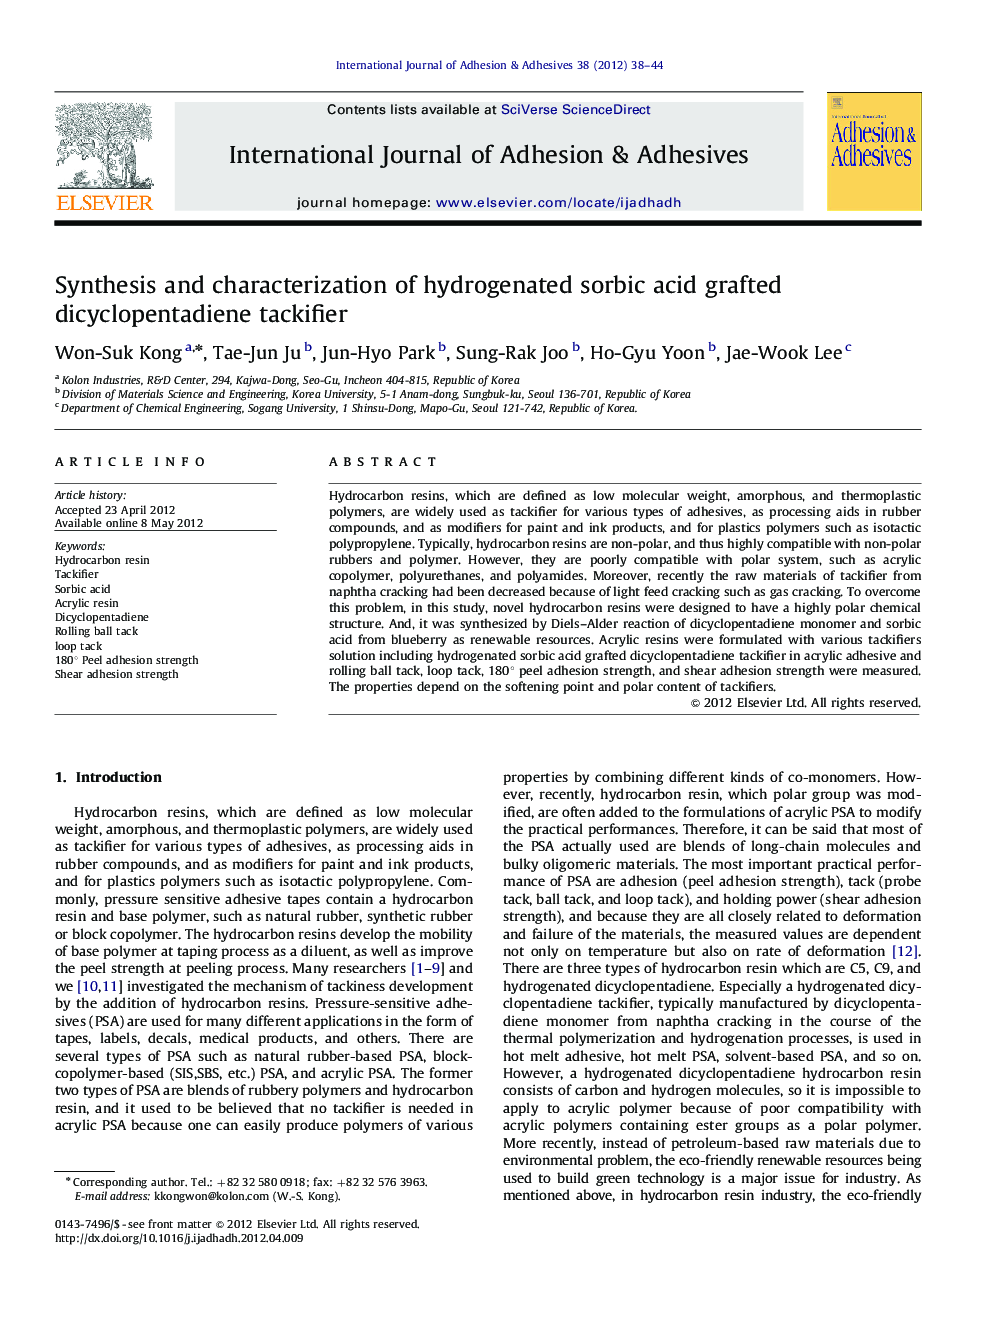 Synthesis and characterization of hydrogenated sorbic acid grafted dicyclopentadiene tackifier